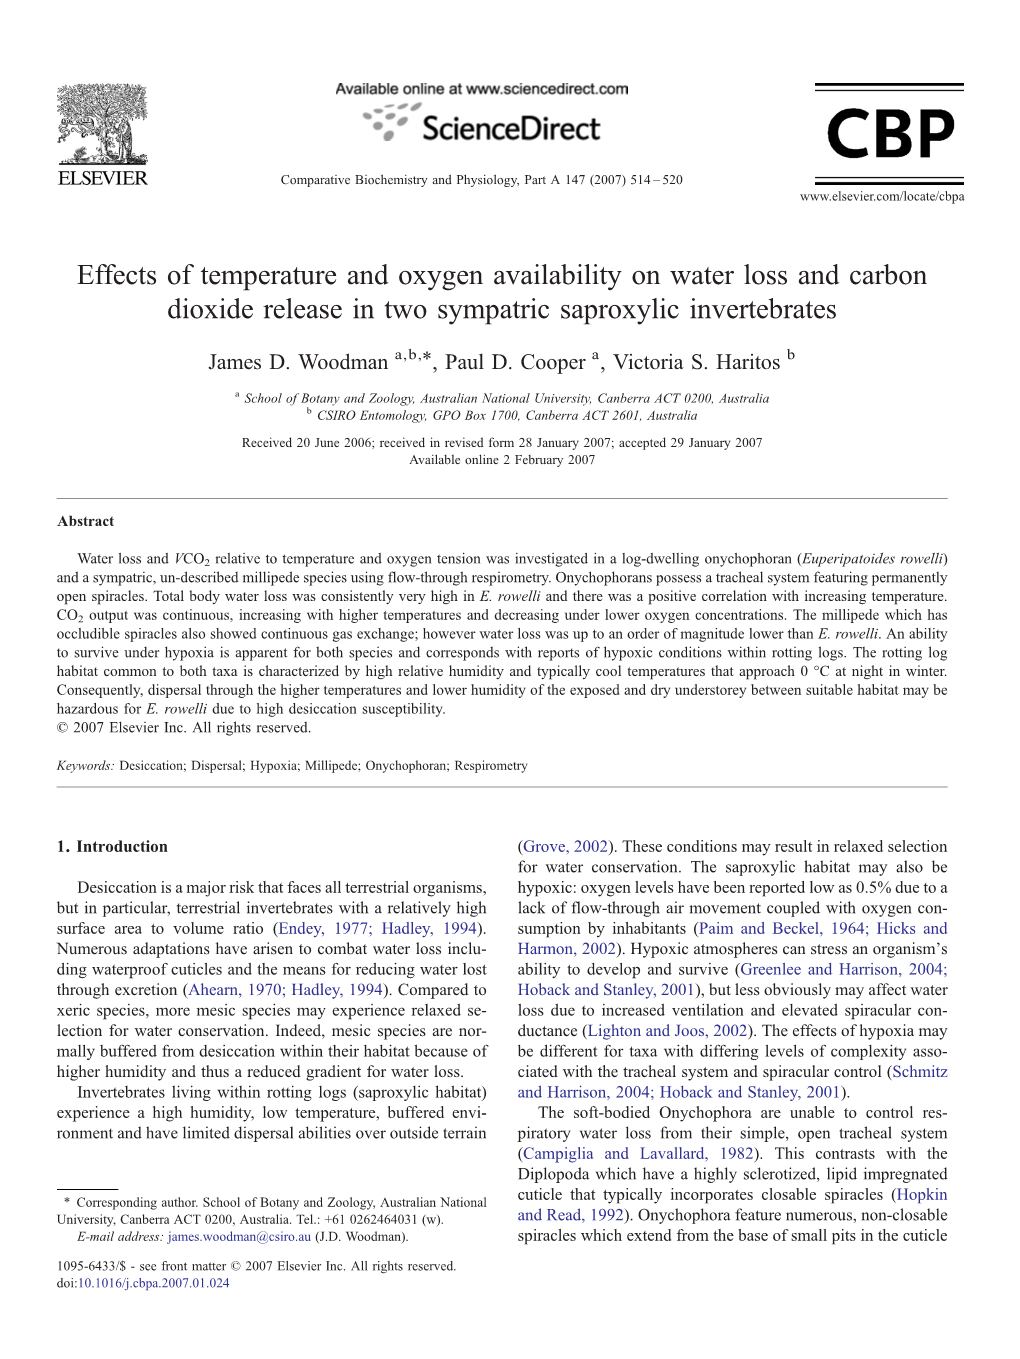 Effects of Temperature and Oxygen Availability on Water Loss and Carbon Dioxide Release in Two Sympatric Saproxylic Invertebrates ⁎ James D